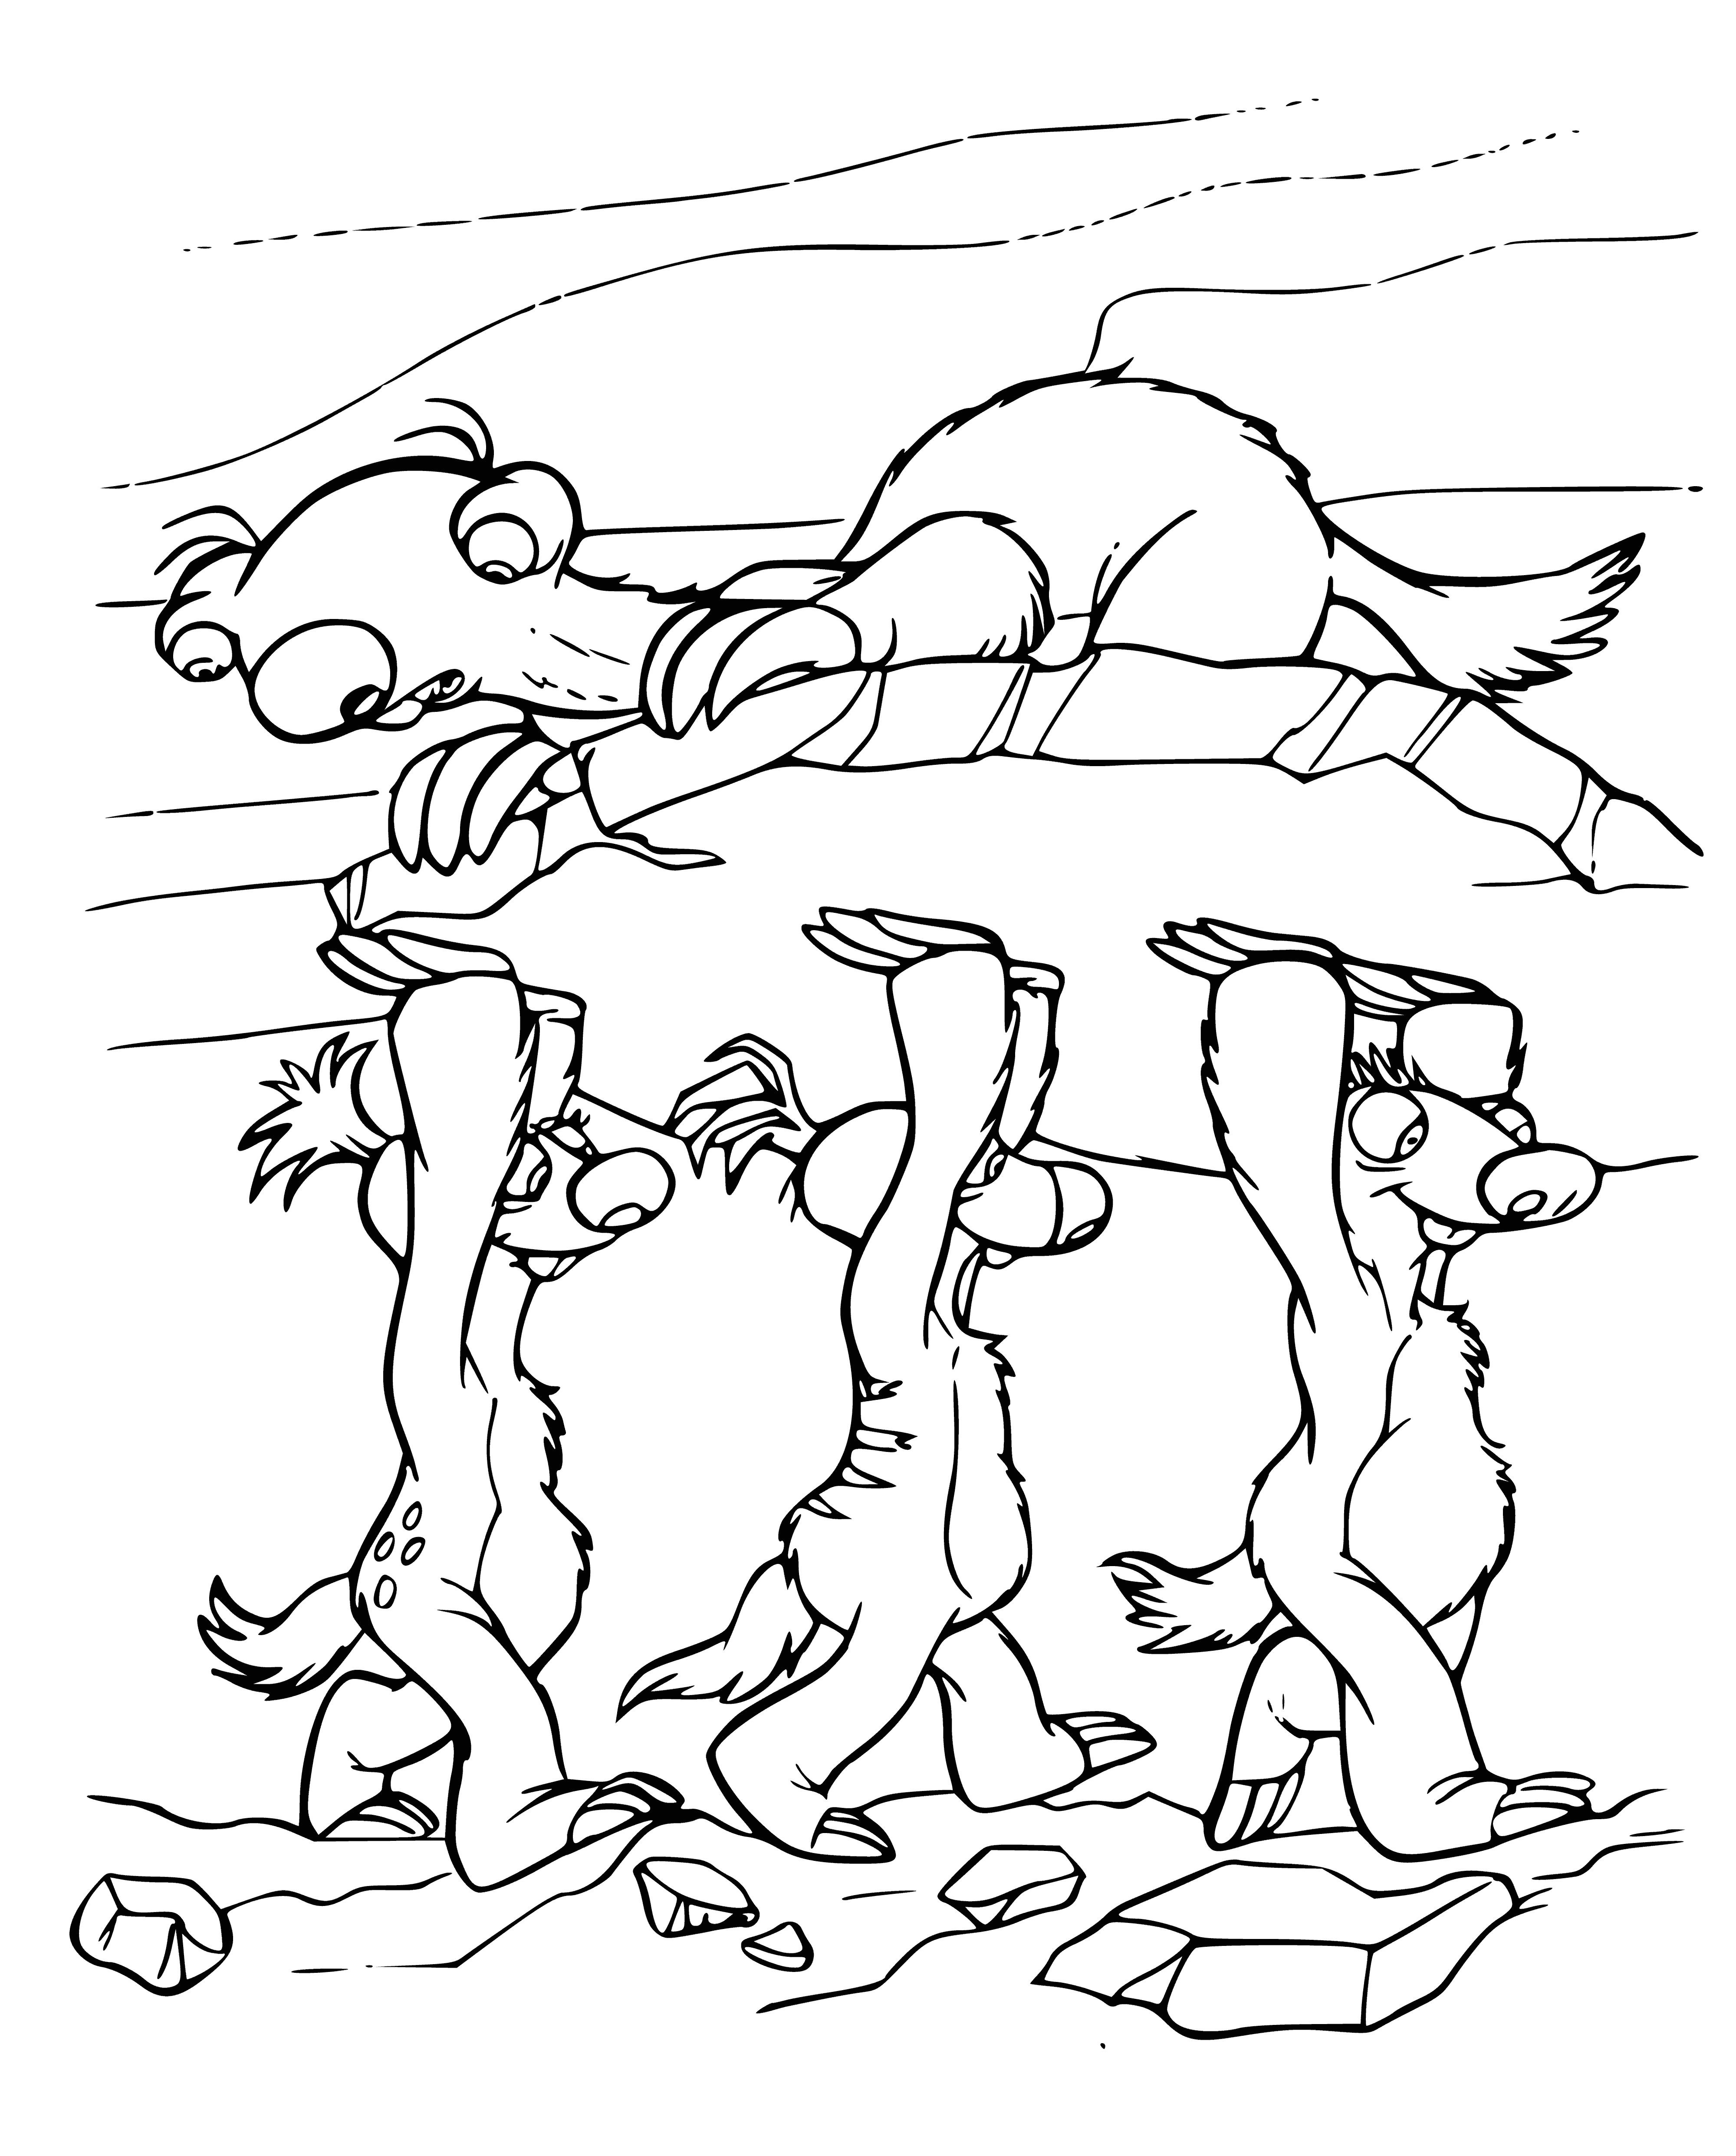 Adoration of Sid coloring page